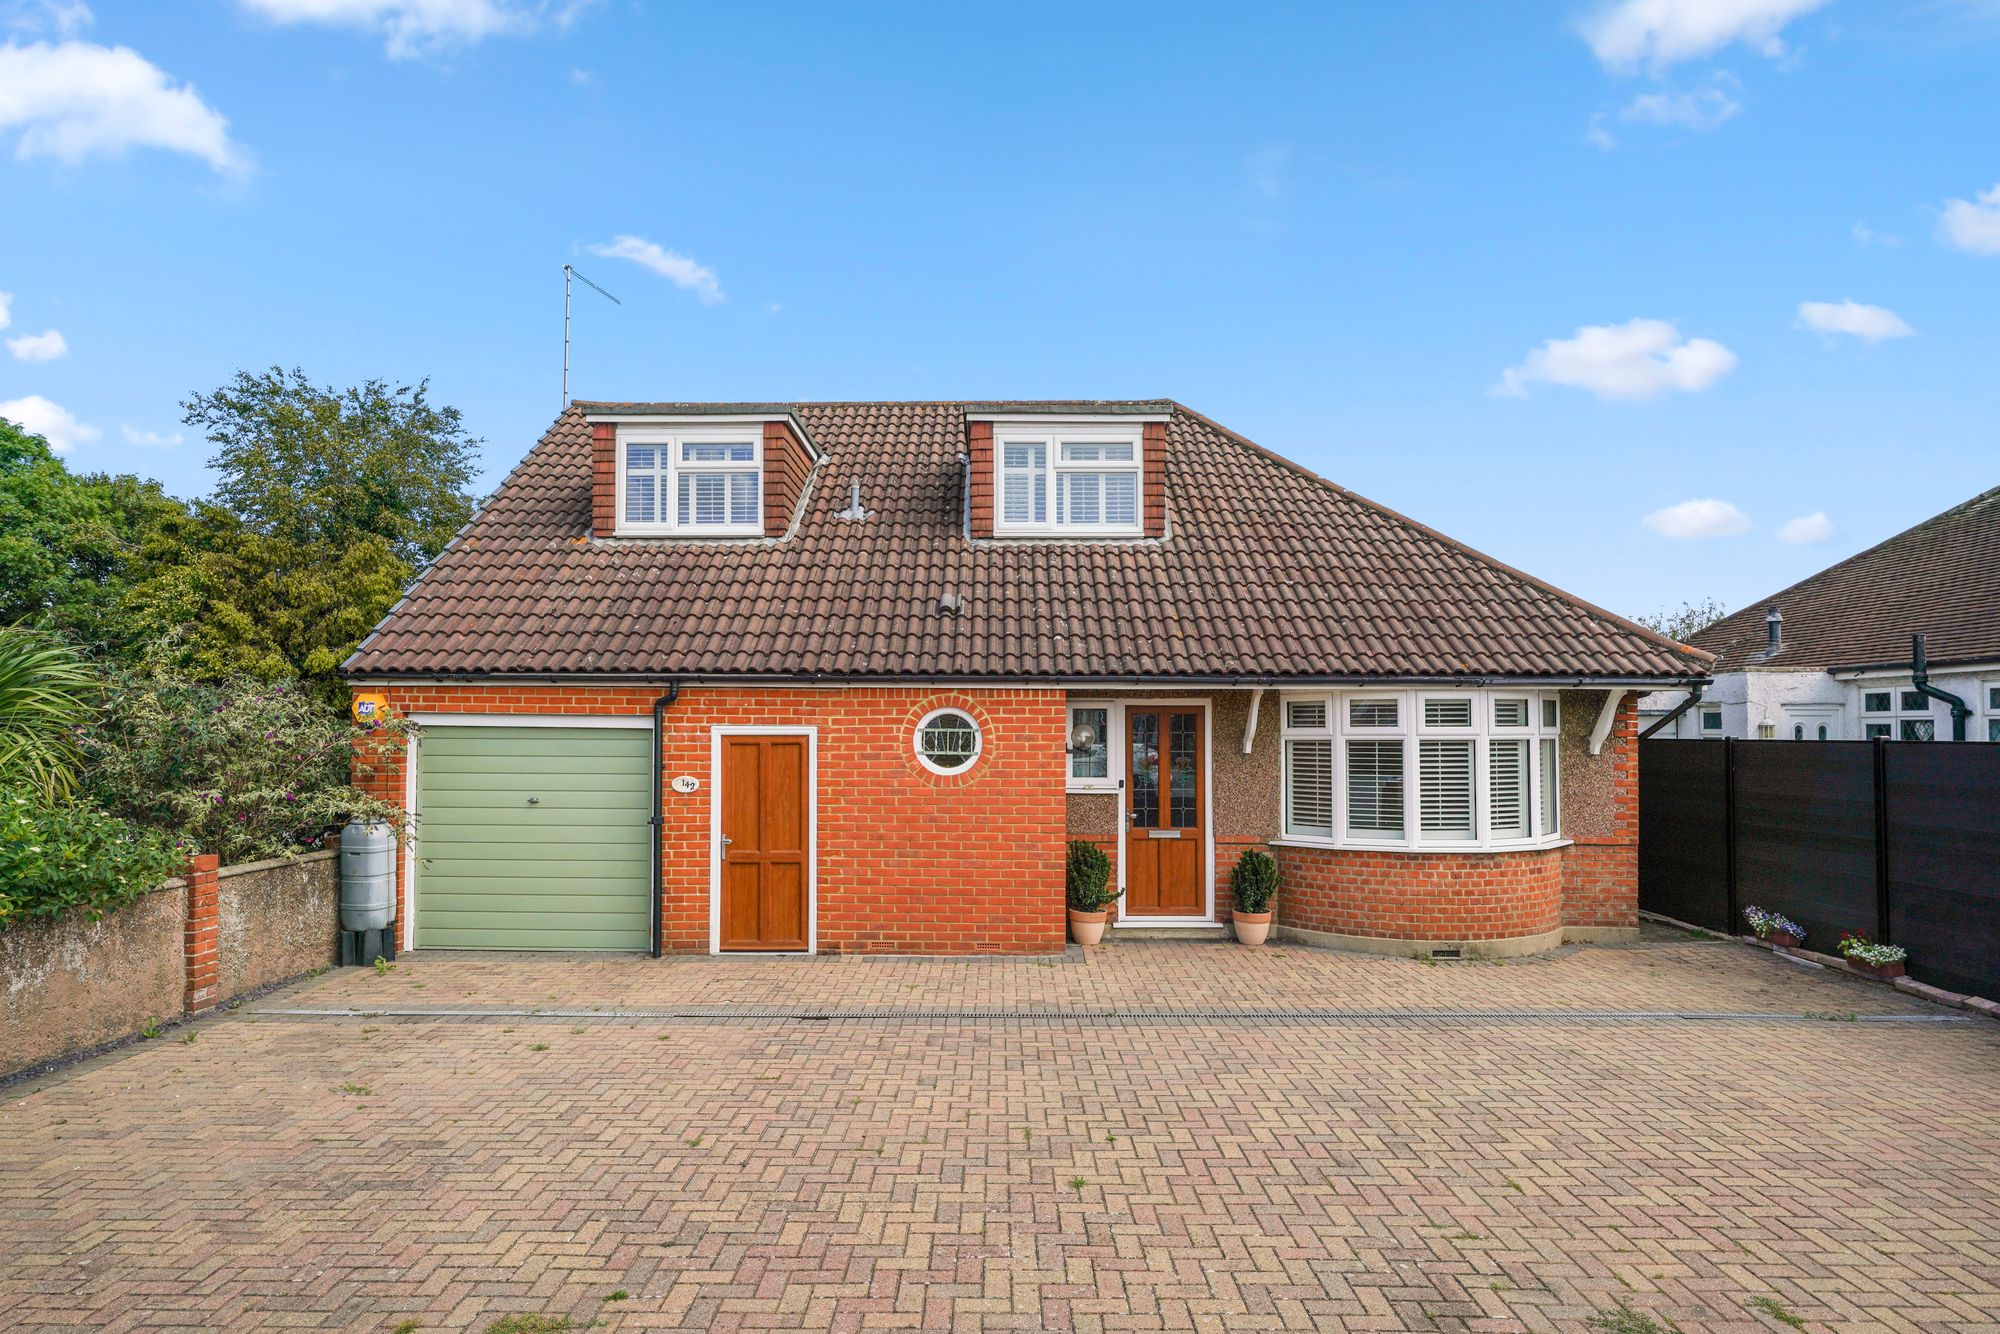 4 bed detached house for sale in Staines Road, Staines-Upon-Thames - Property Image 1